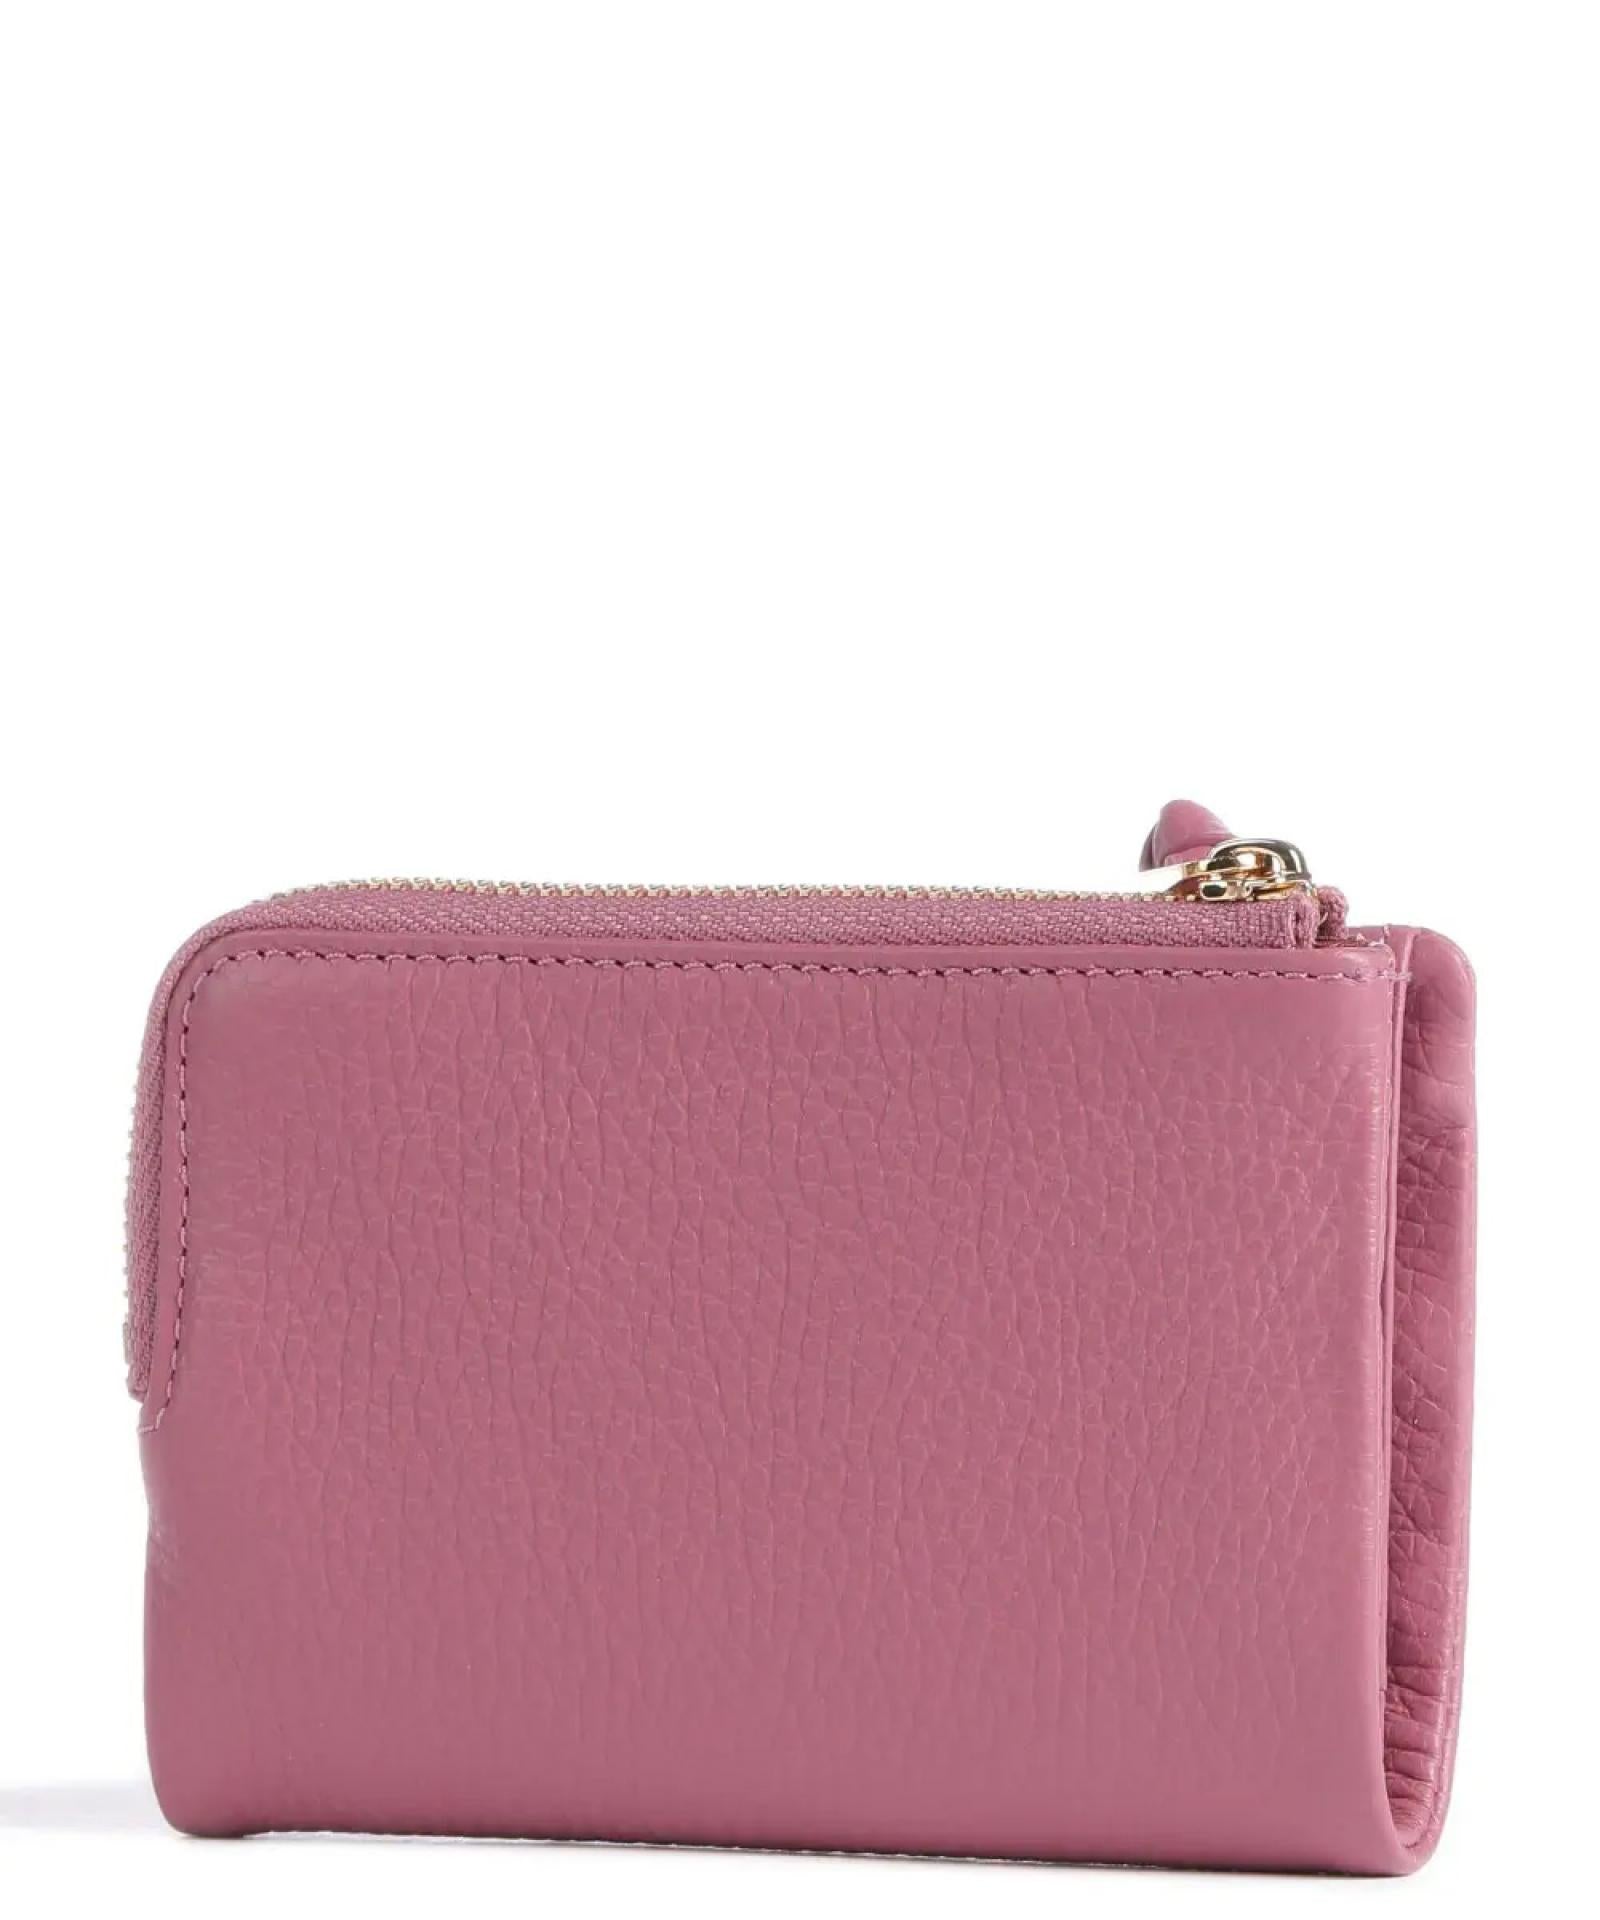 Coccinelle WALLET GRAINED LEATHER / PULP PINK